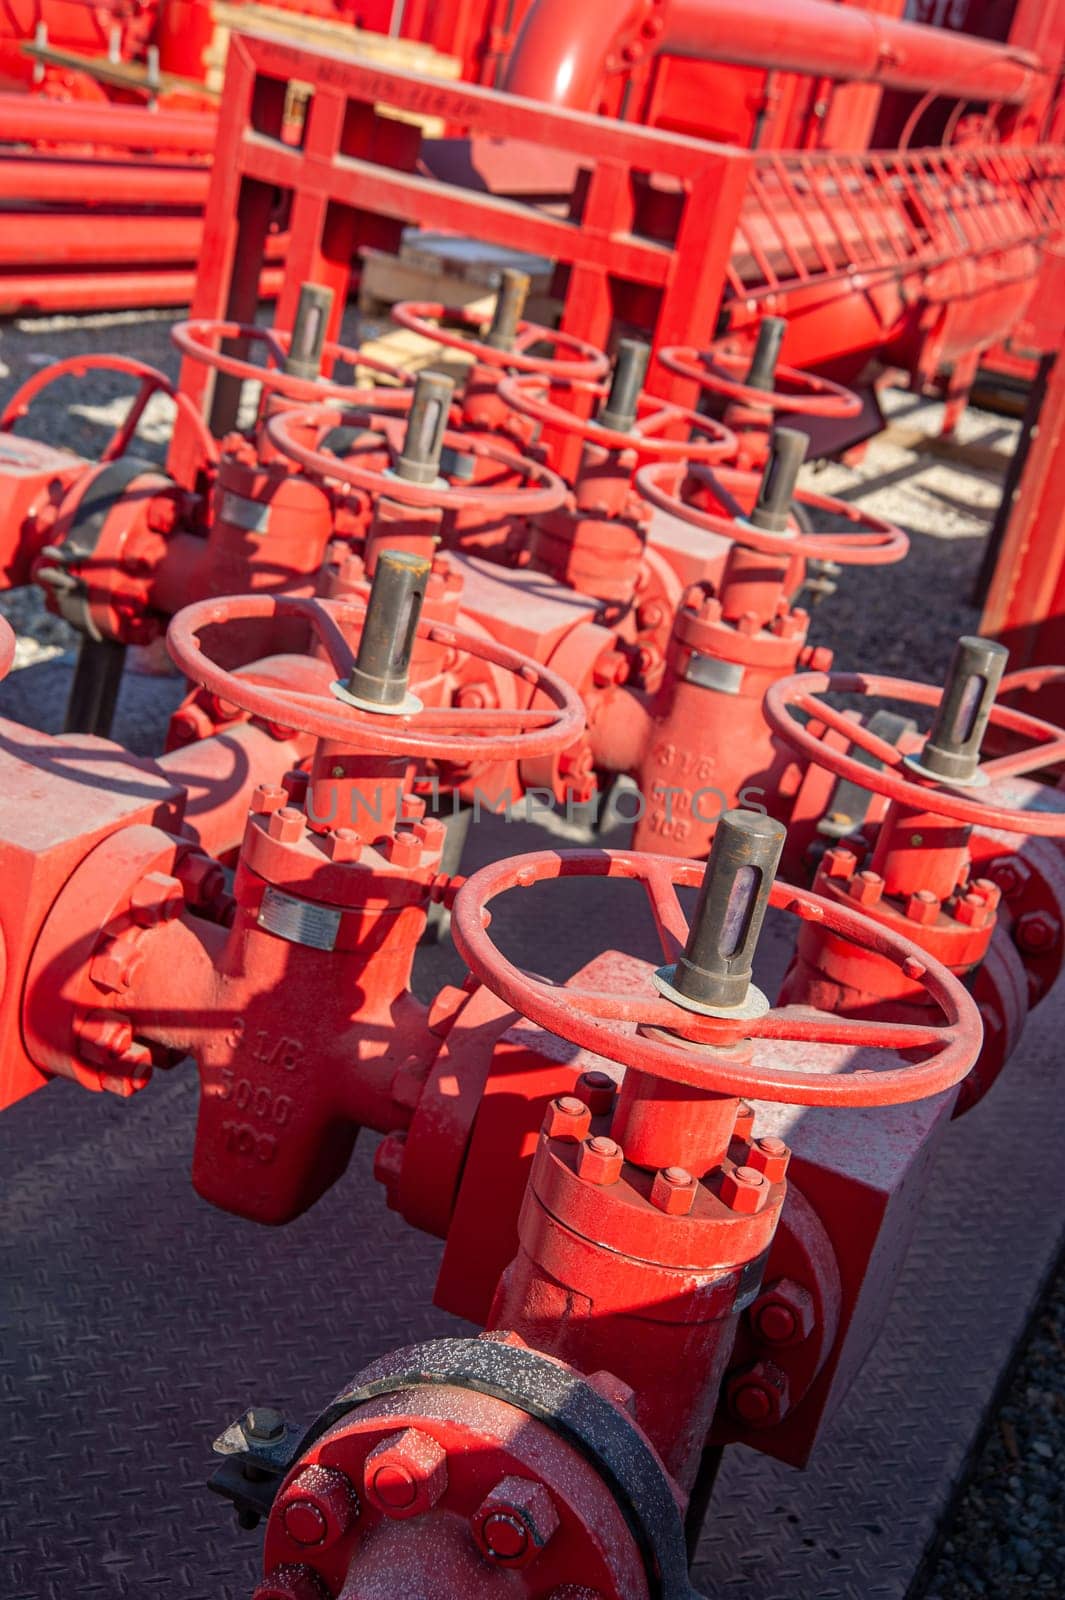 A closeup of a red industrial oil pipeline valves by A_Karim